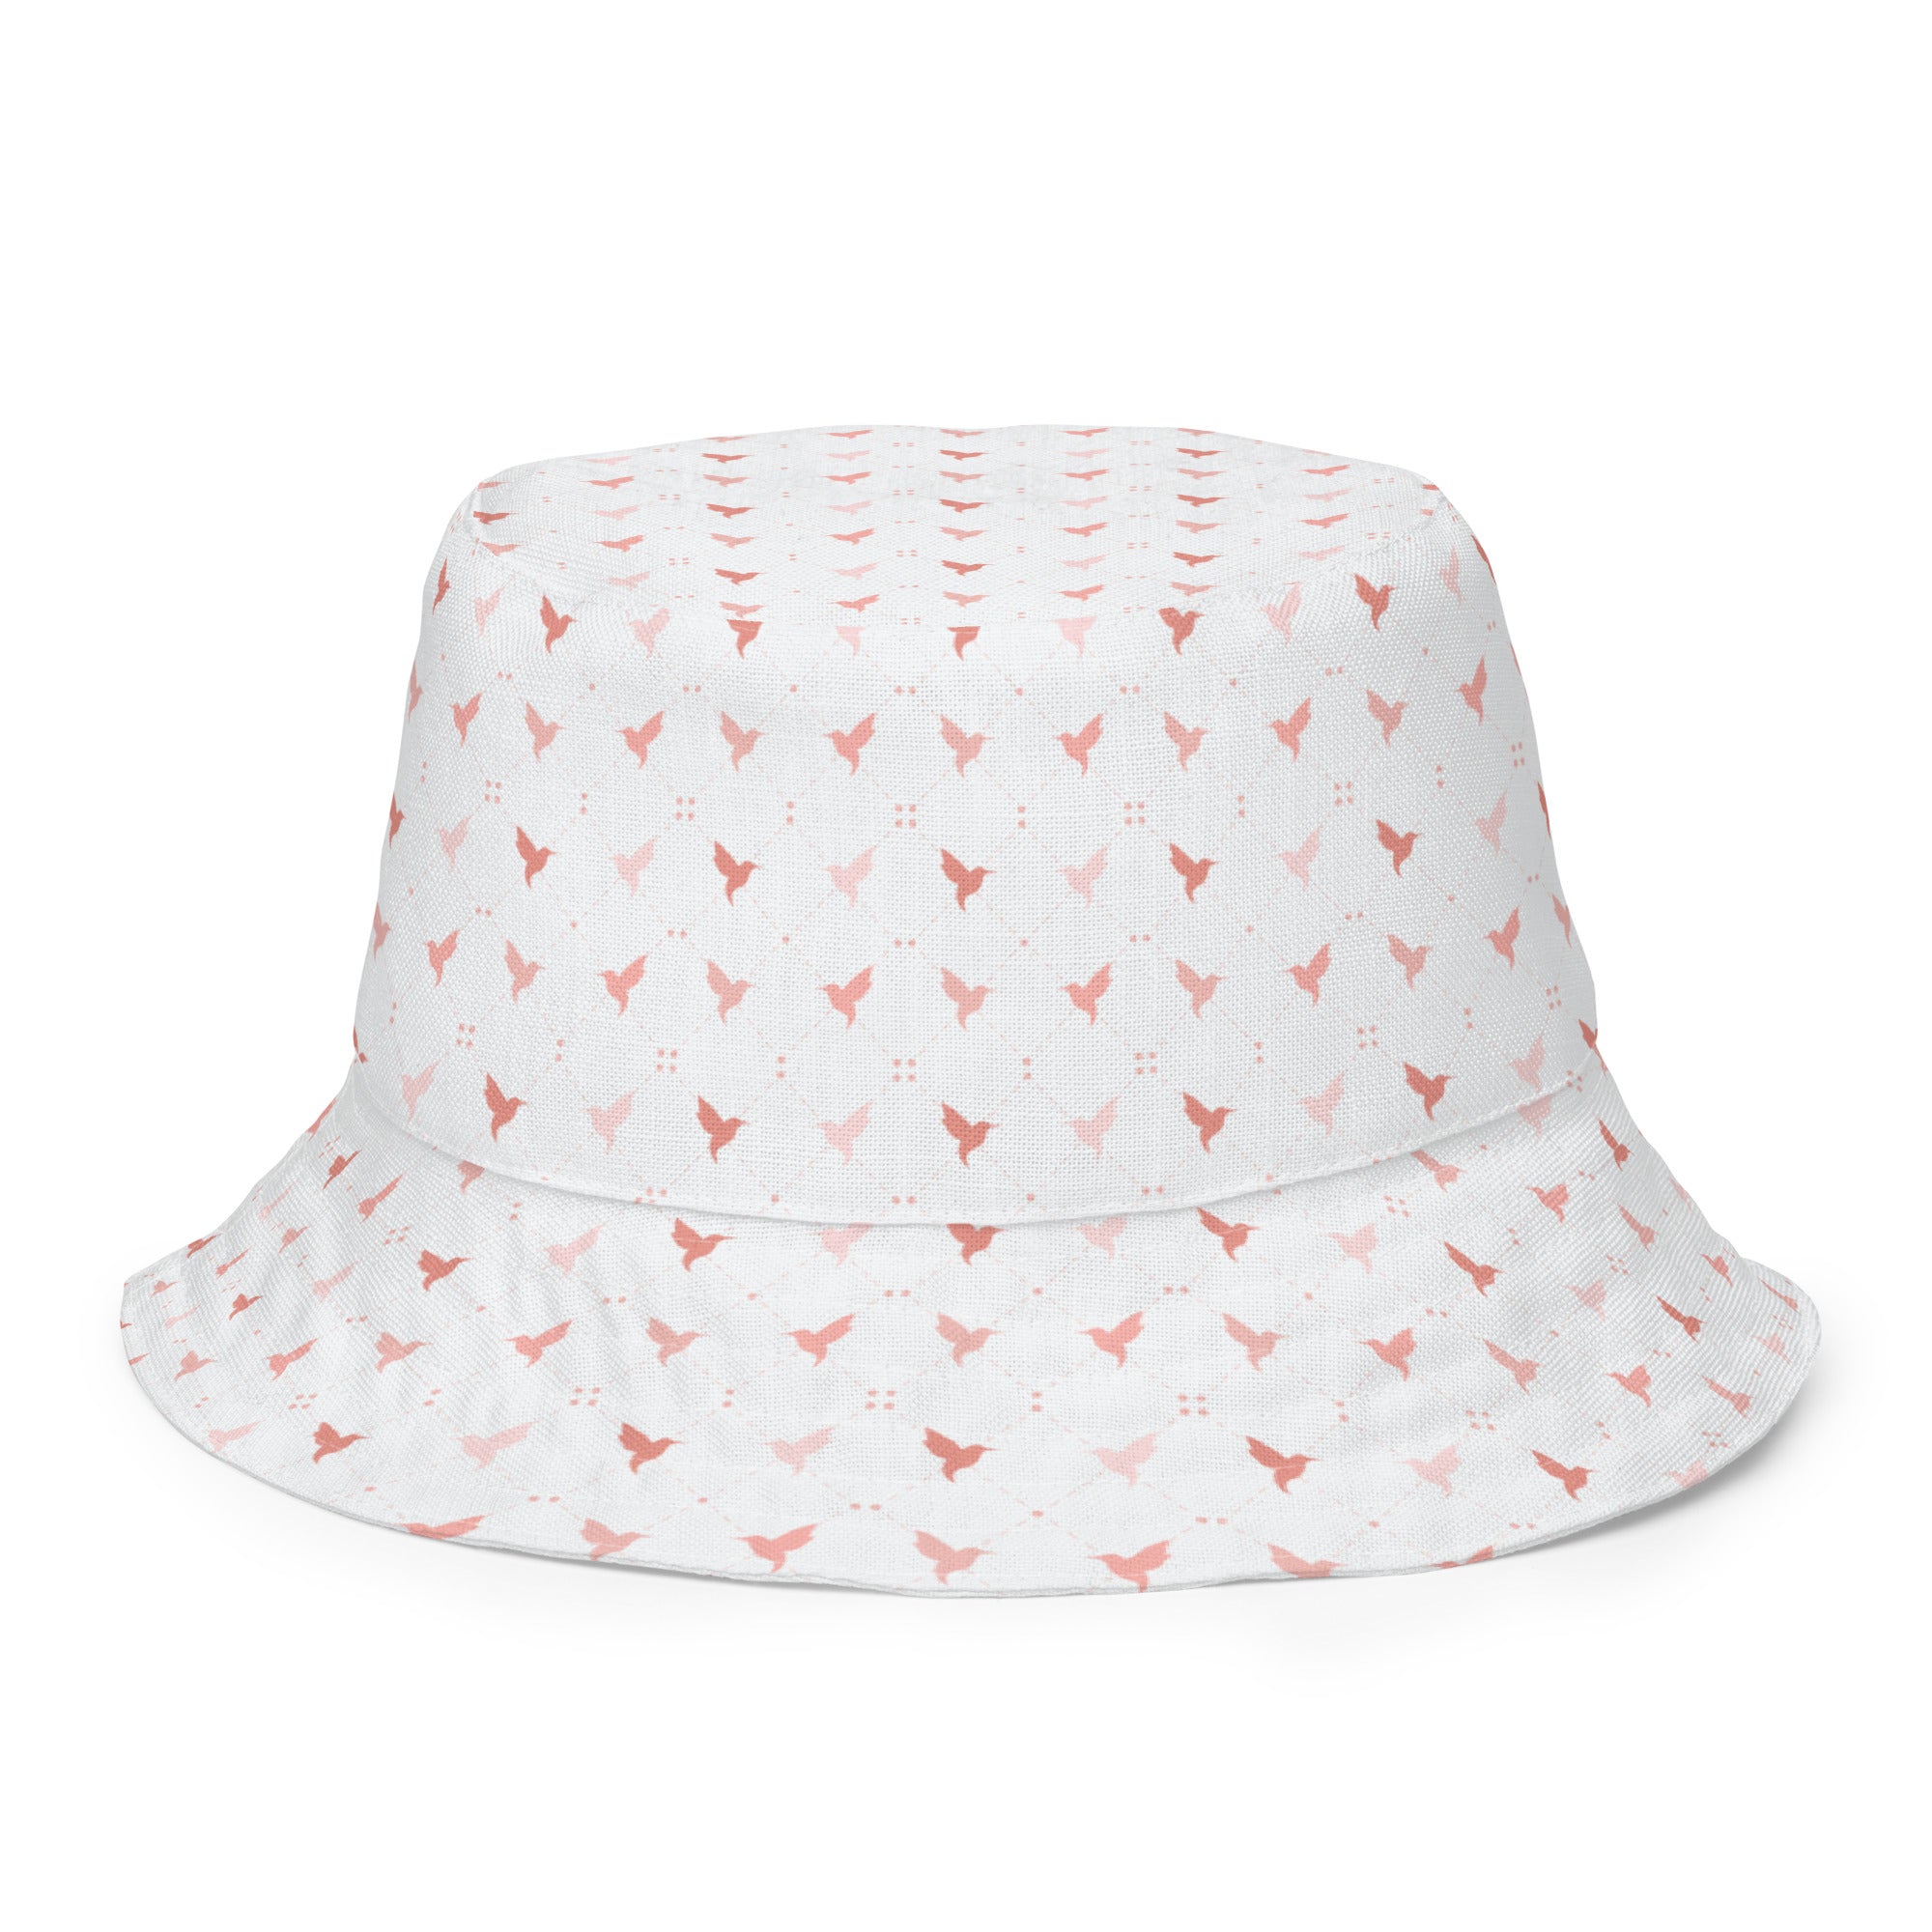 all-over-print-reversible-bucket-hat-white-front-outside-64595a5e01fbe.jpg